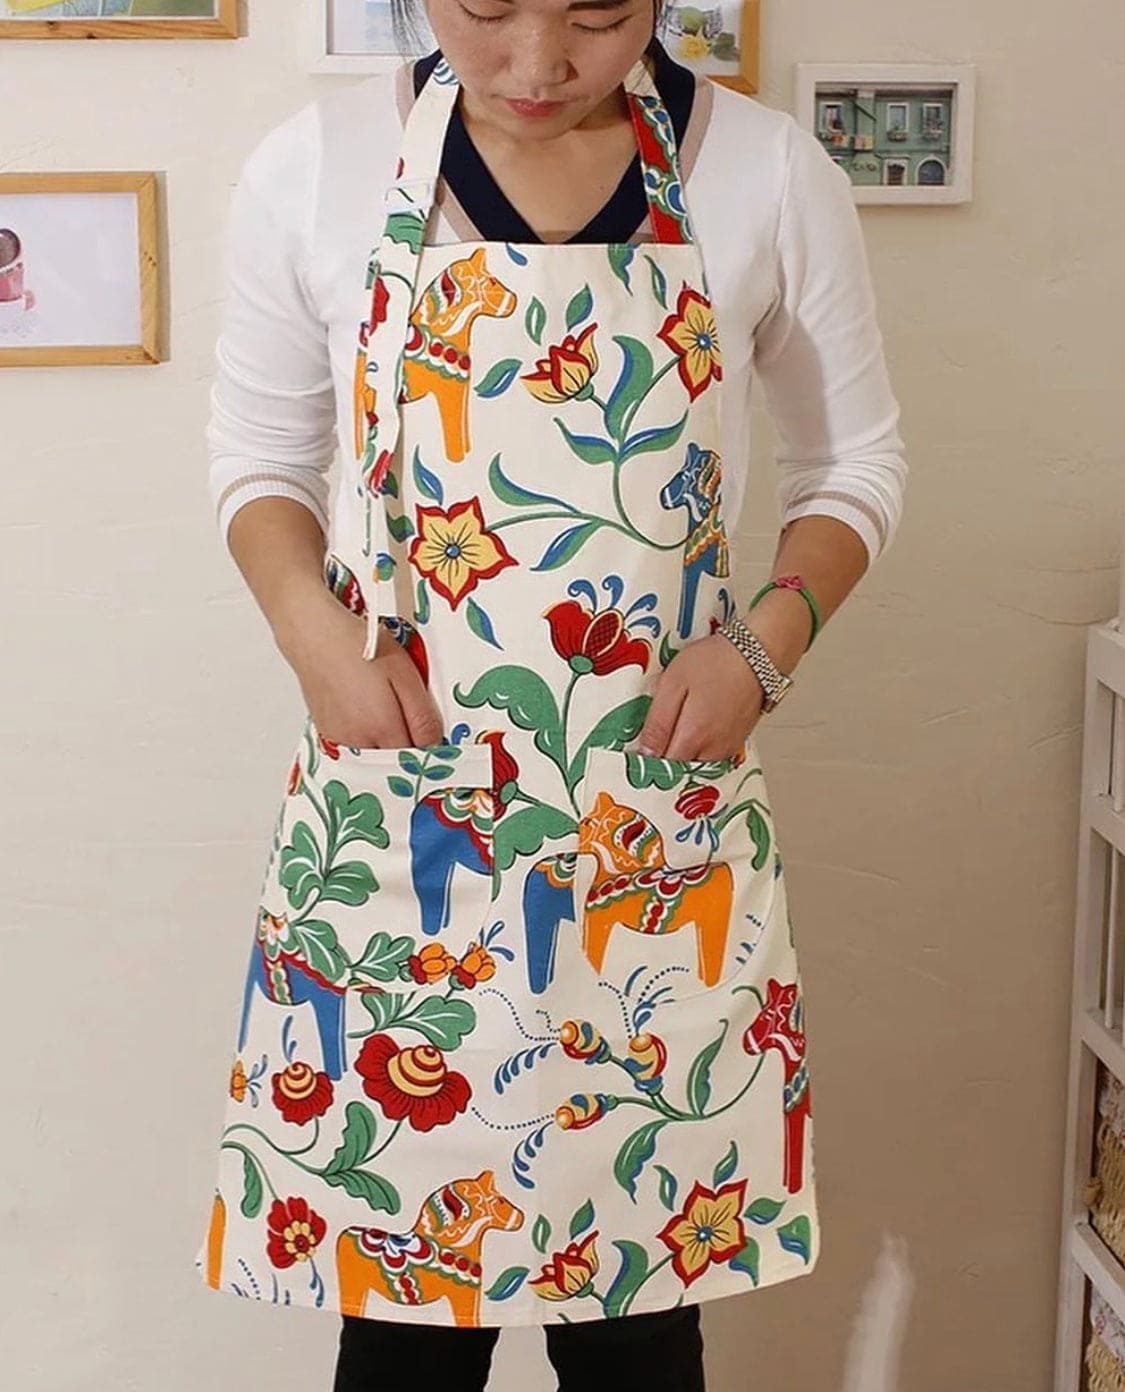 Cotton Kitchen Aprons, Baking Restaurants Work Clothes With Pockets, Sleeveless Bibs Fabric Fashion Couple Aprons